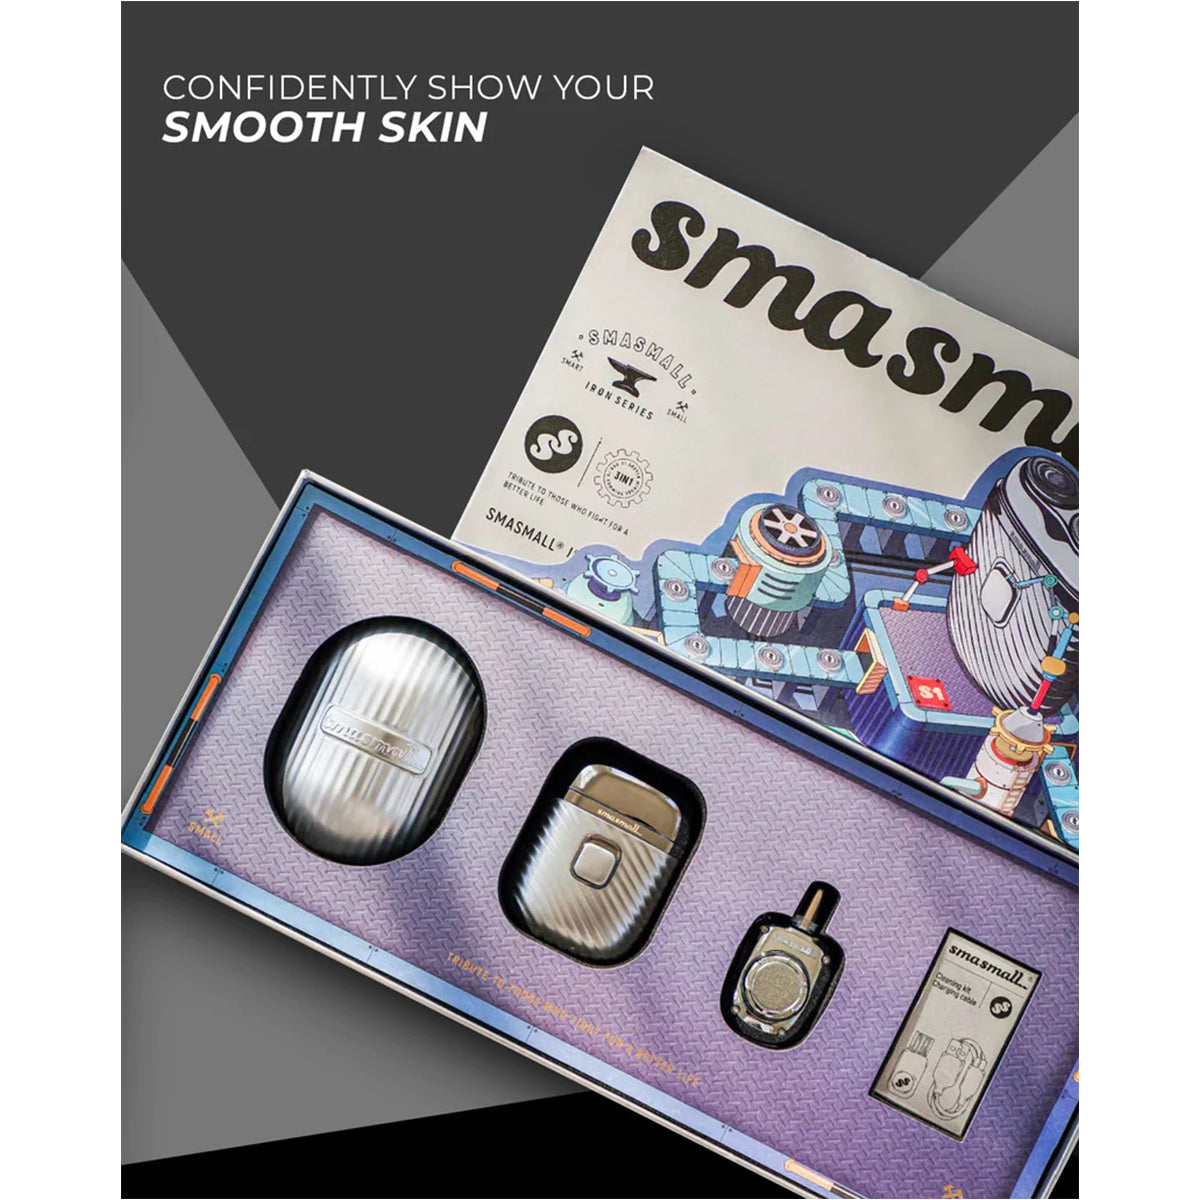 O2W SELECTION Smasmall Gentlemen Series 3-in-1 Electric Shaver, Nose Trimmer, Space Egg Box, Silver